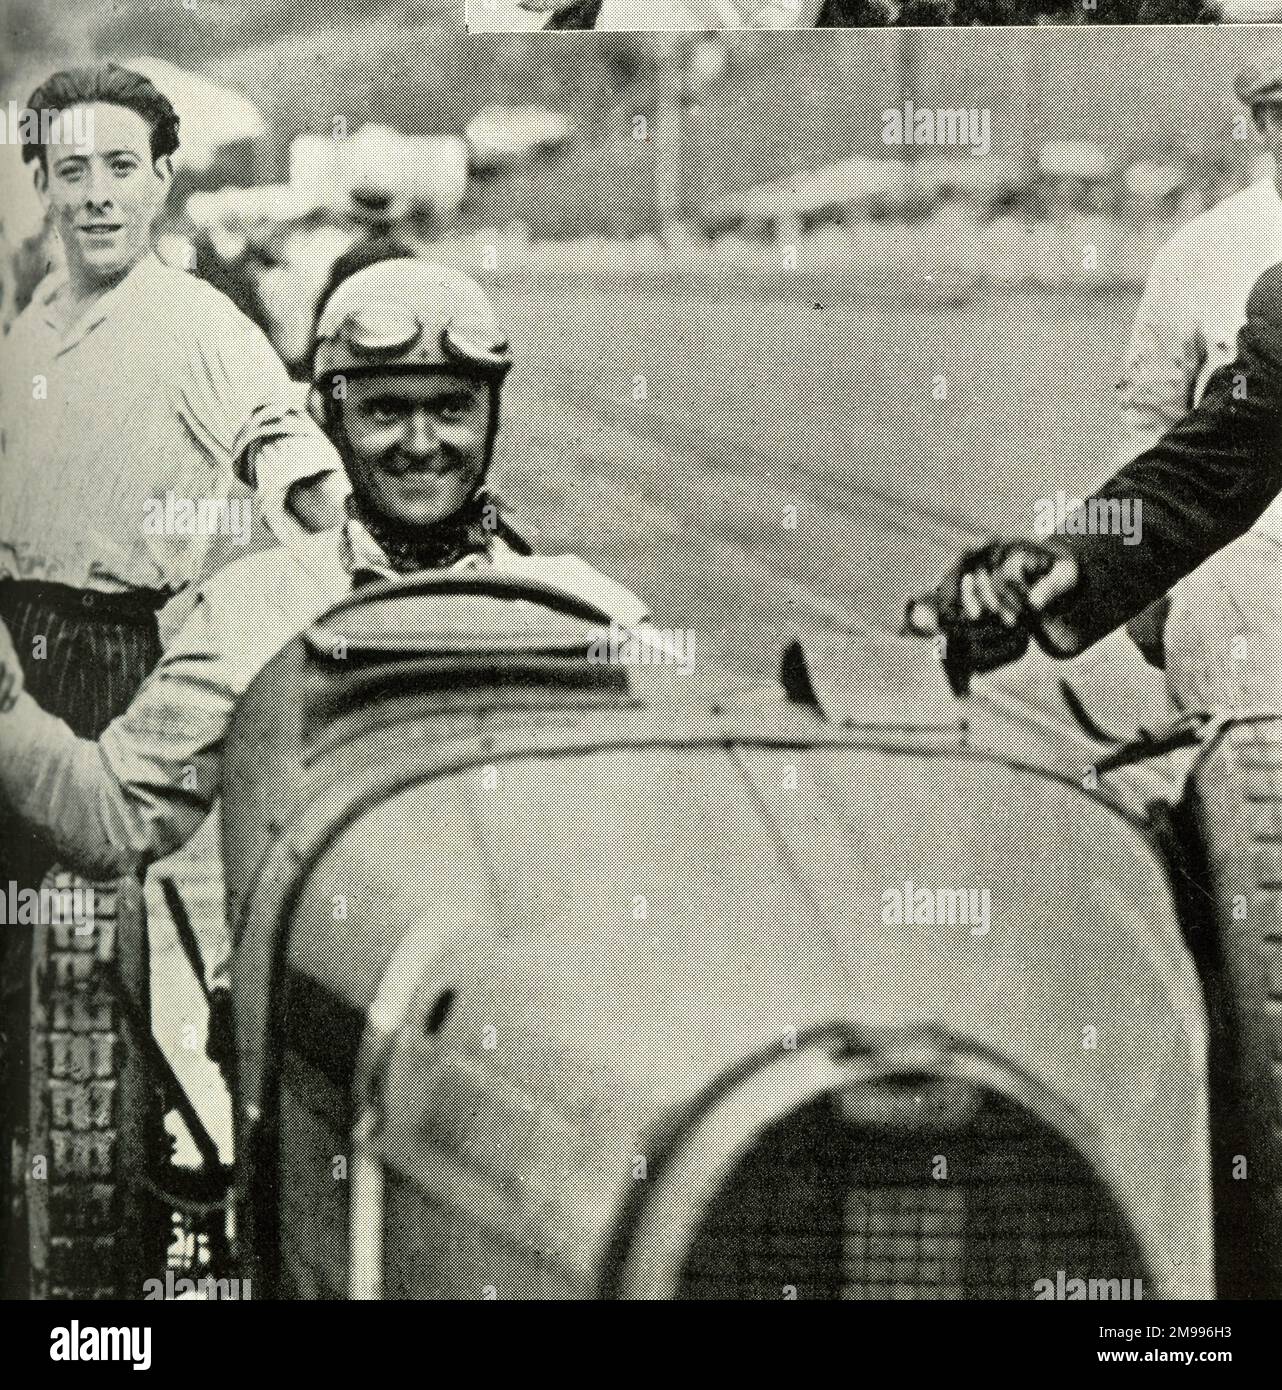 Louis Chiron, motor racing driver, at the wheel of a Bugatti in San Sebastian, winning the Spanish Grand Prix for the second time. Stock Photo